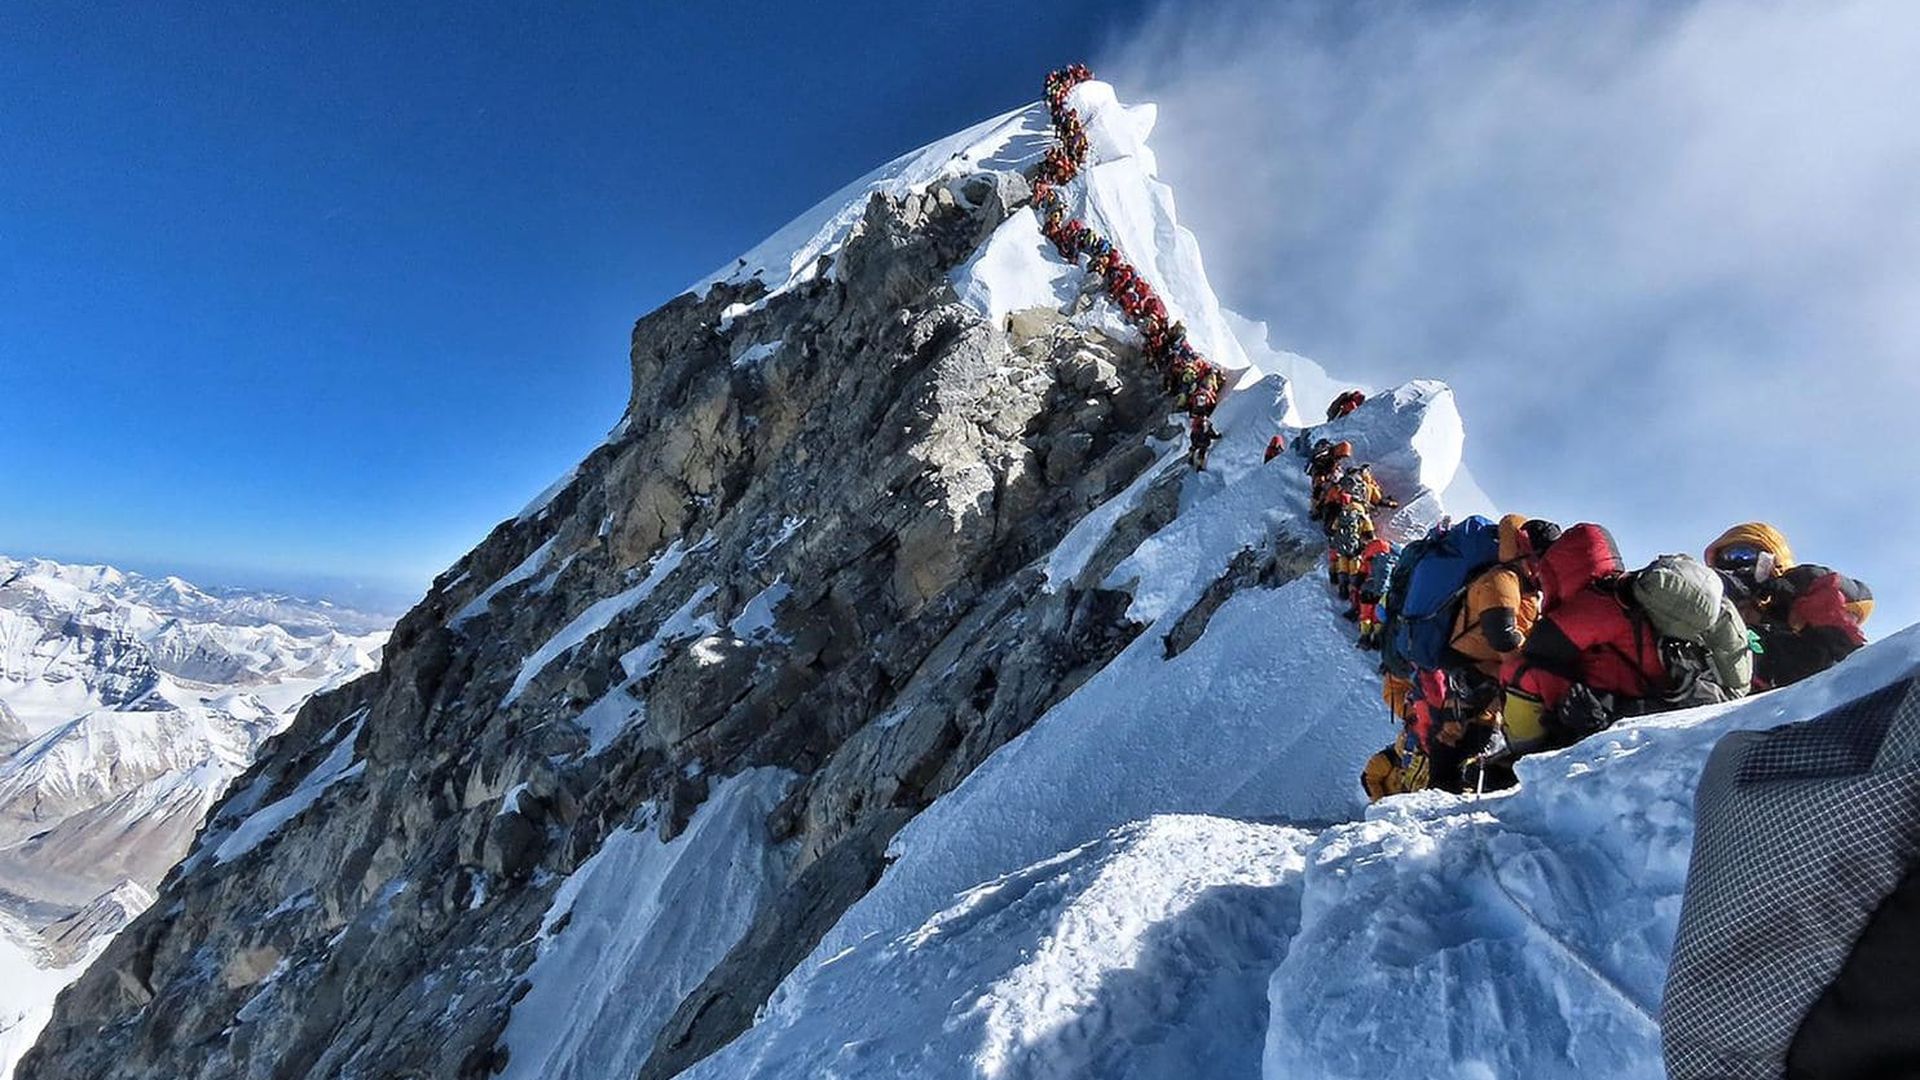 Mountain climbers line up to stand at Mount Everest’s summit on May 22. (Nirmal Purja/Project Possible/AFP/Getty Images)